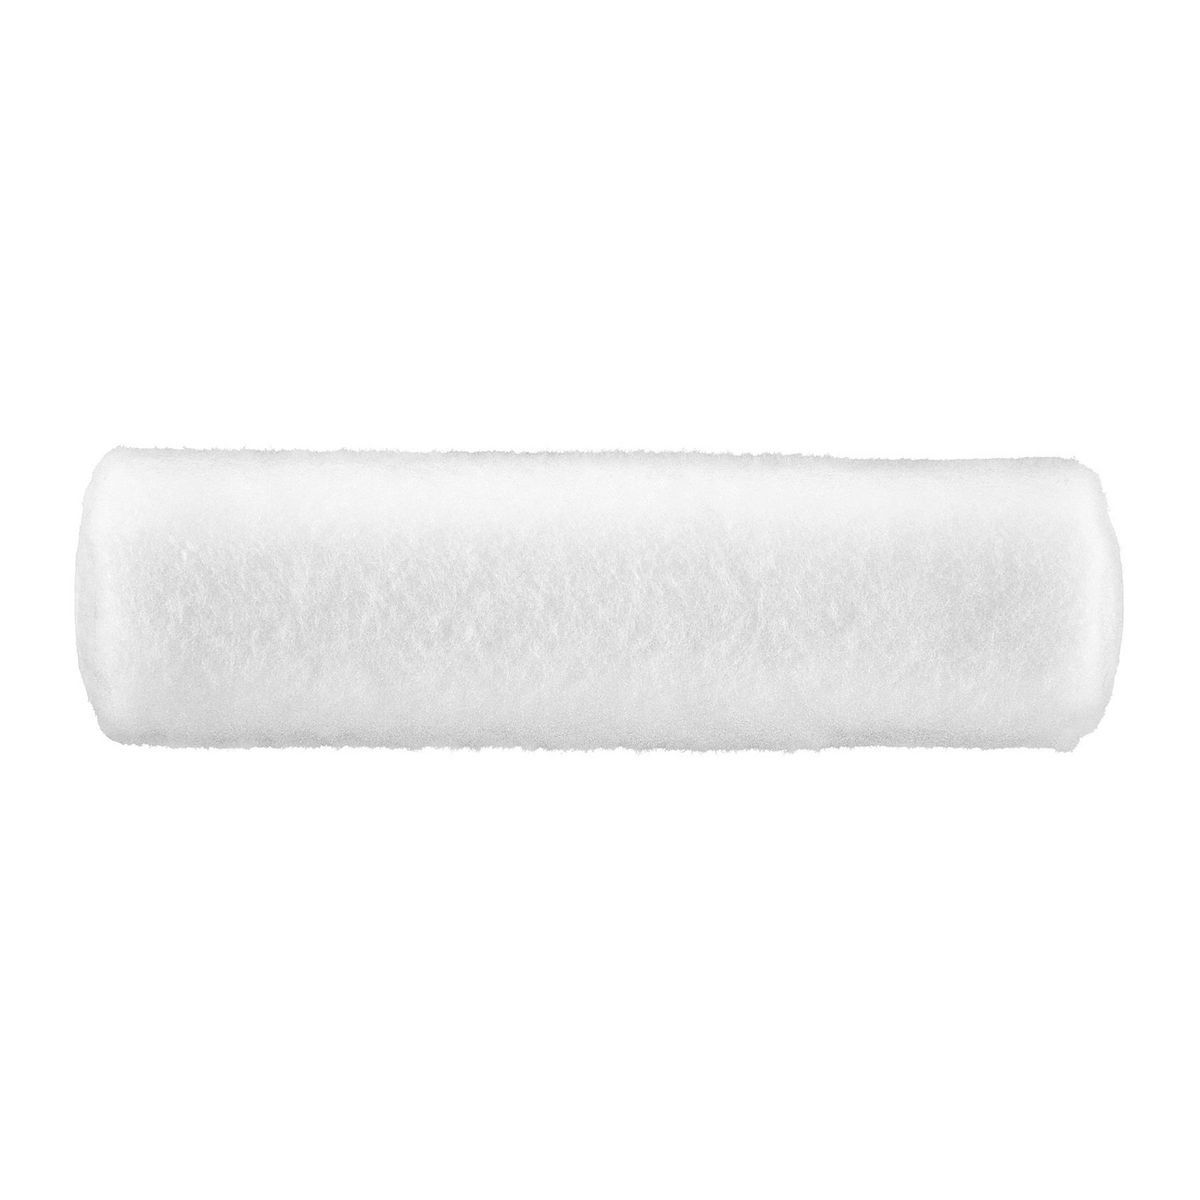 AVANTI 9 in. Paint Roller Cover with 1/2 in. Nap - BEST Quality